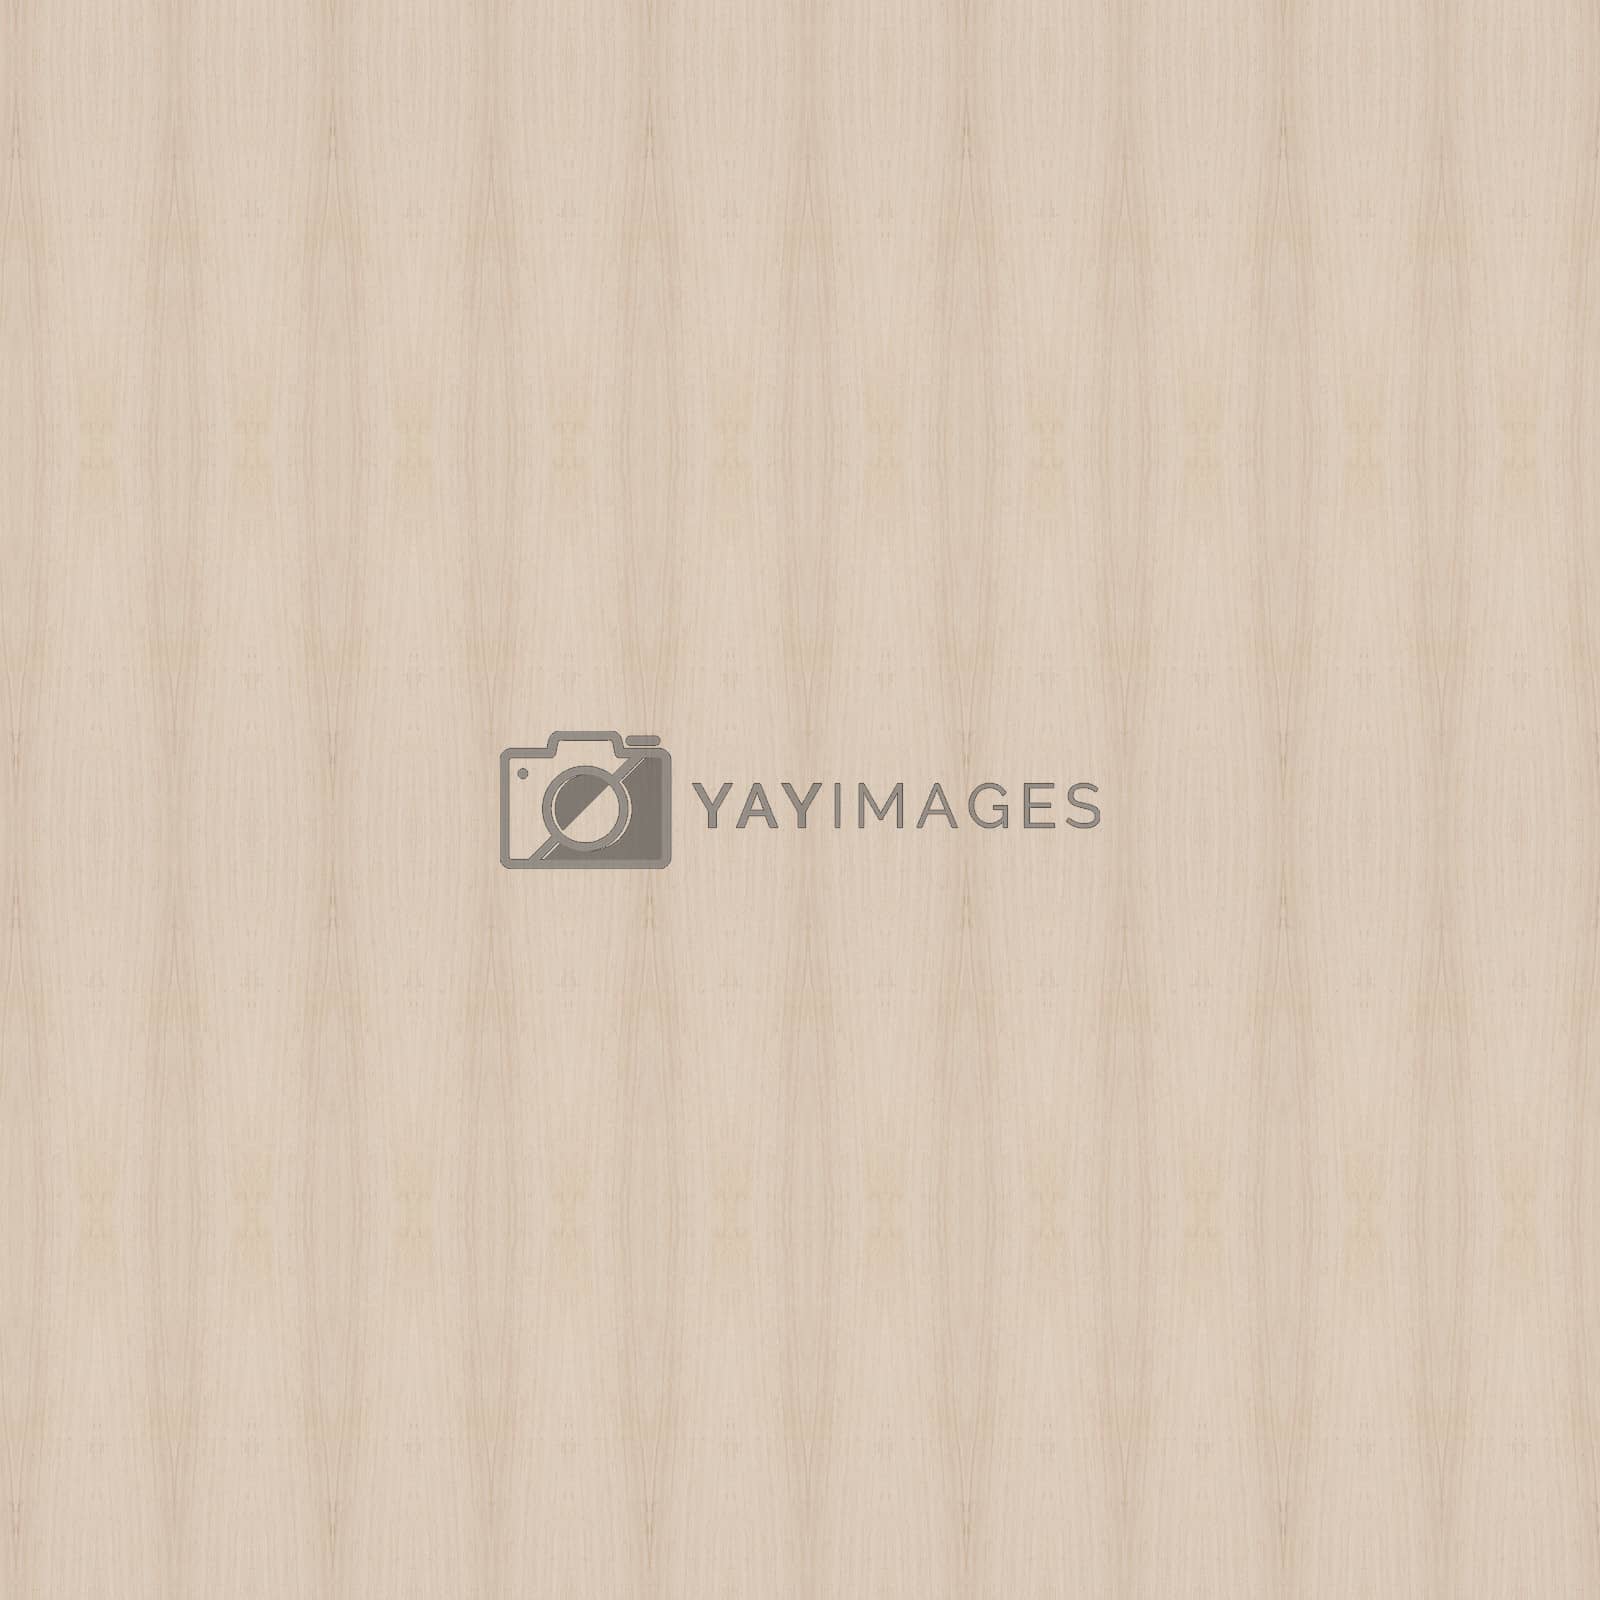 Royalty free image of wood texture by ibphoto